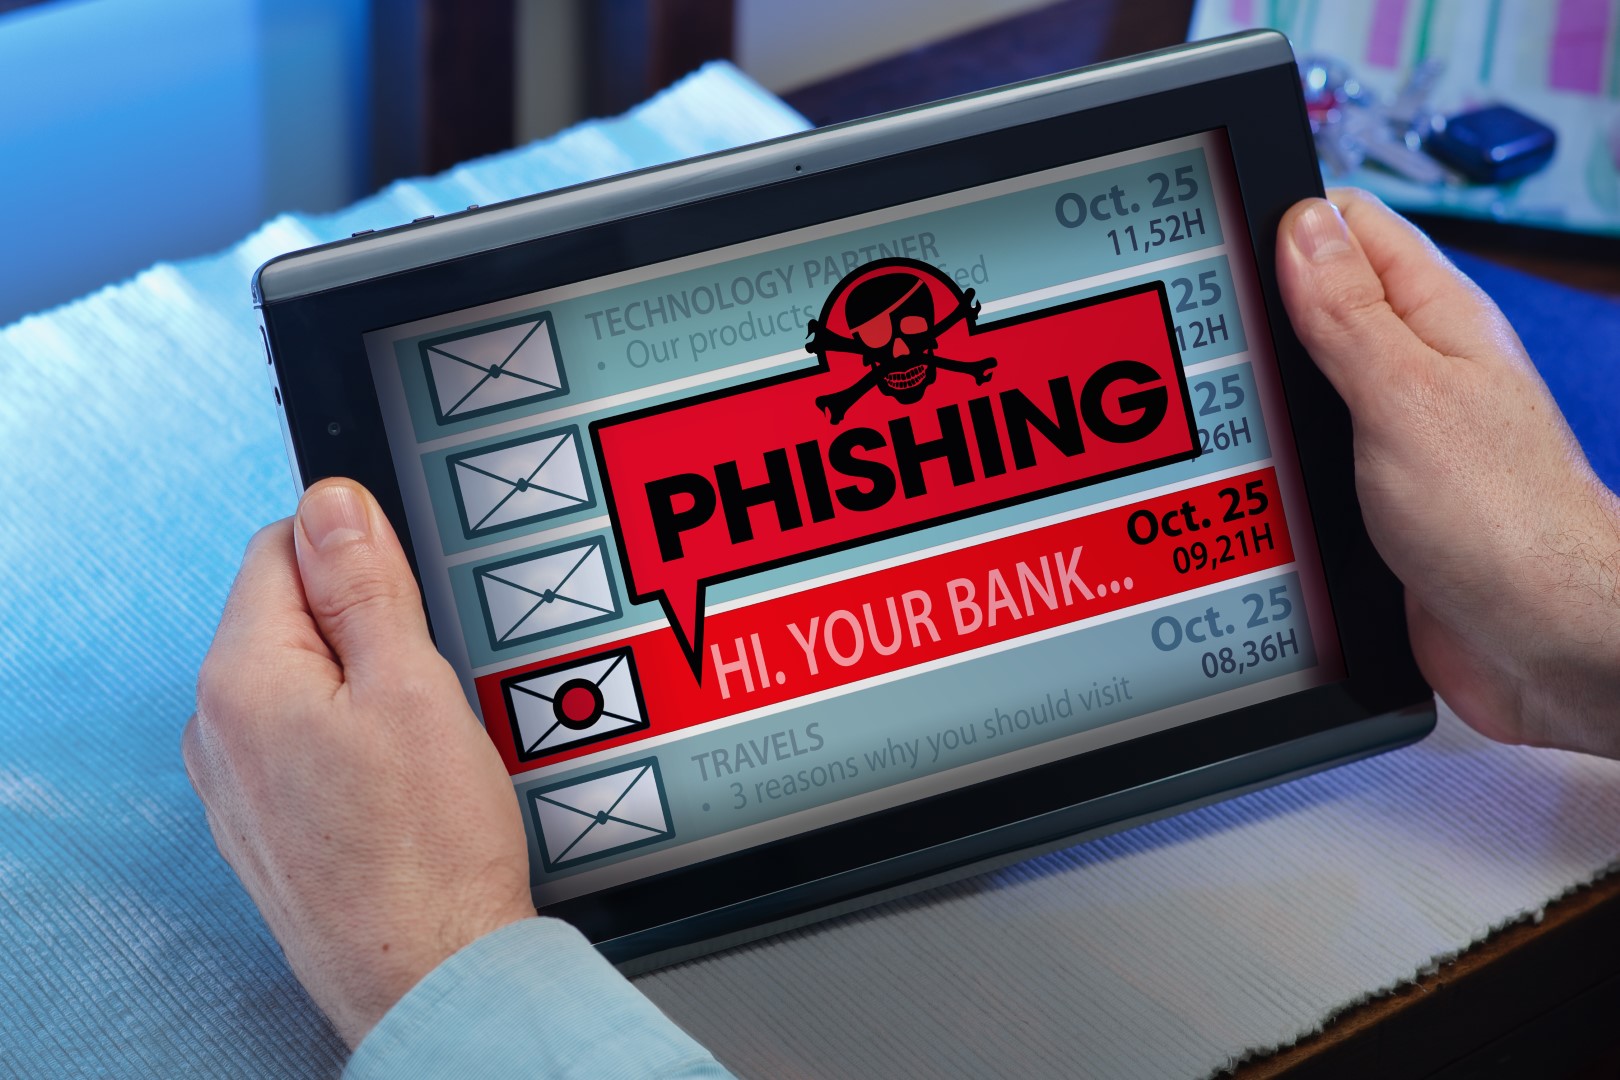 Businessman holds tablet computer that displays skull and crossbones image captioned “PHISHING.” 